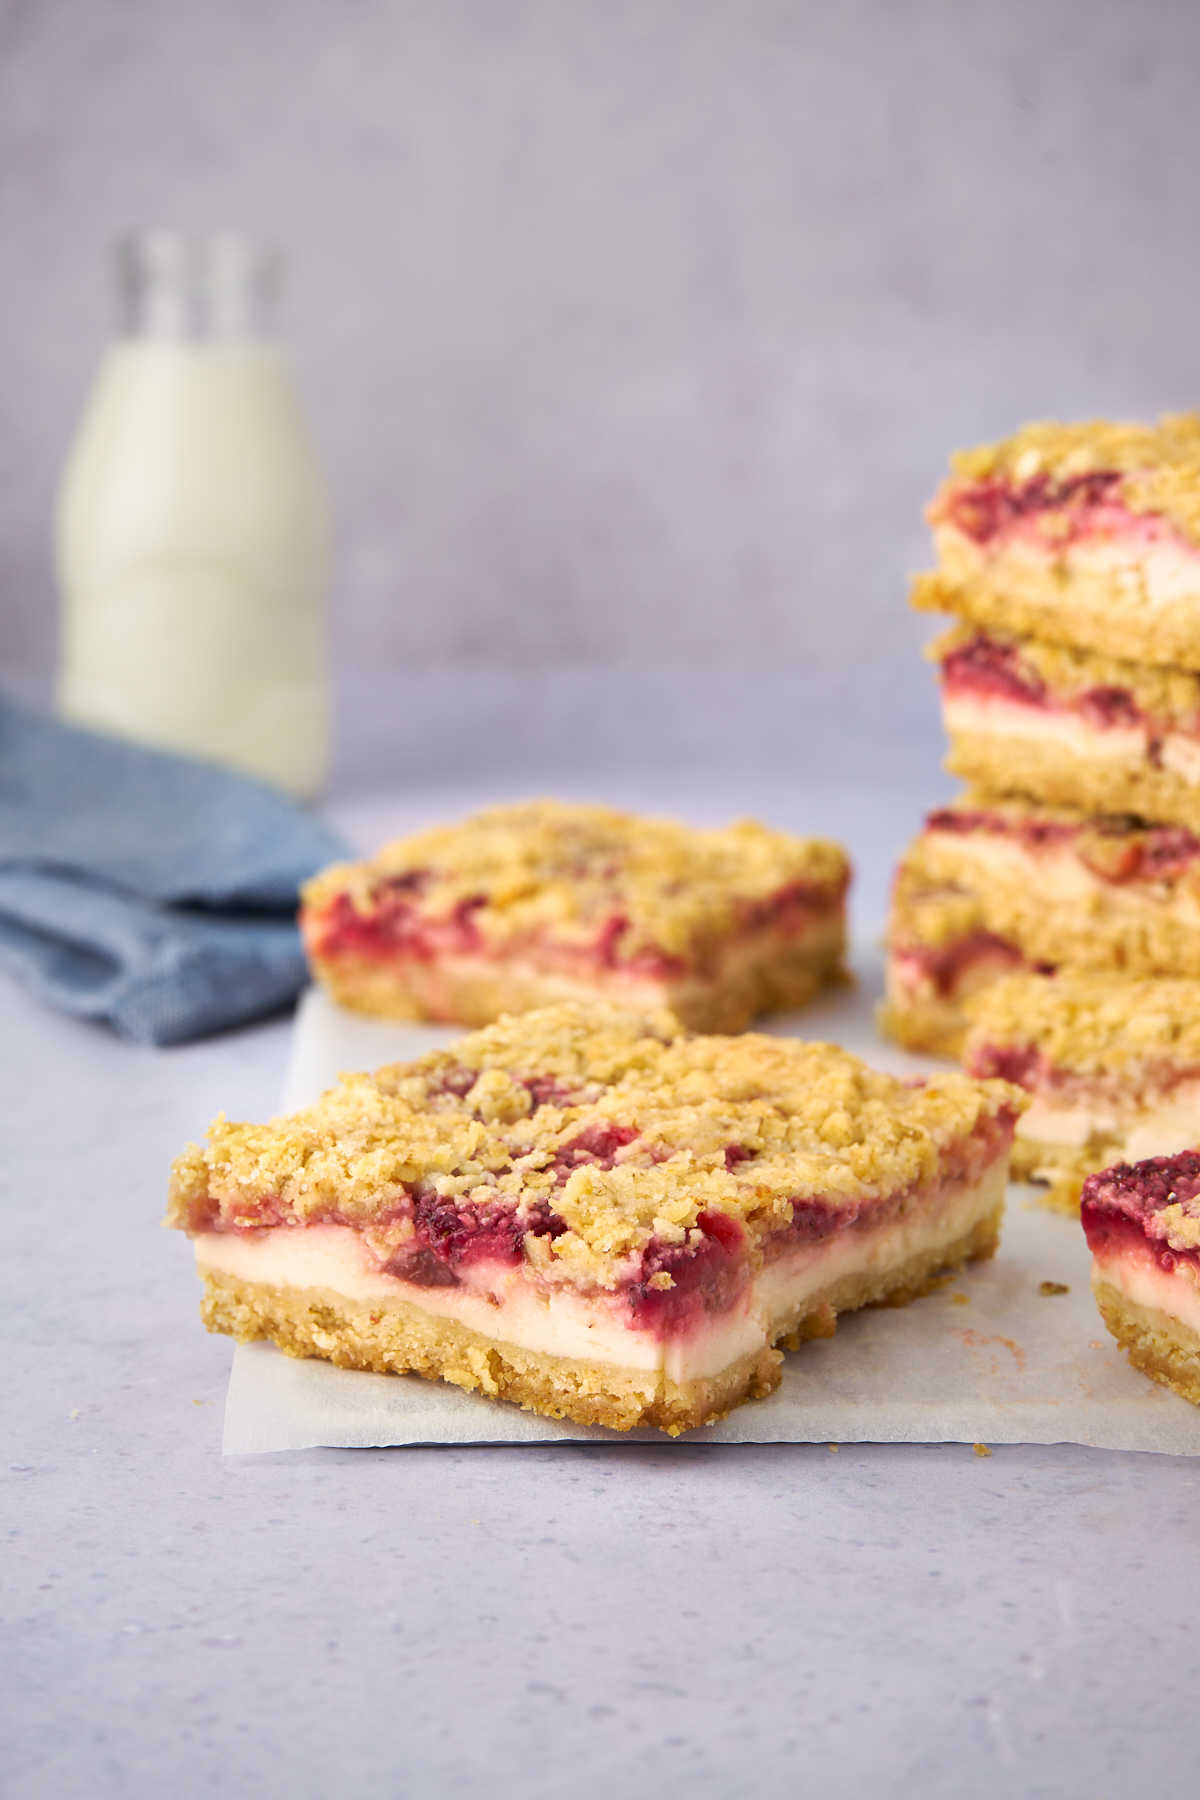 Strawberry yogurt crumble bars with jug of milk in the background.